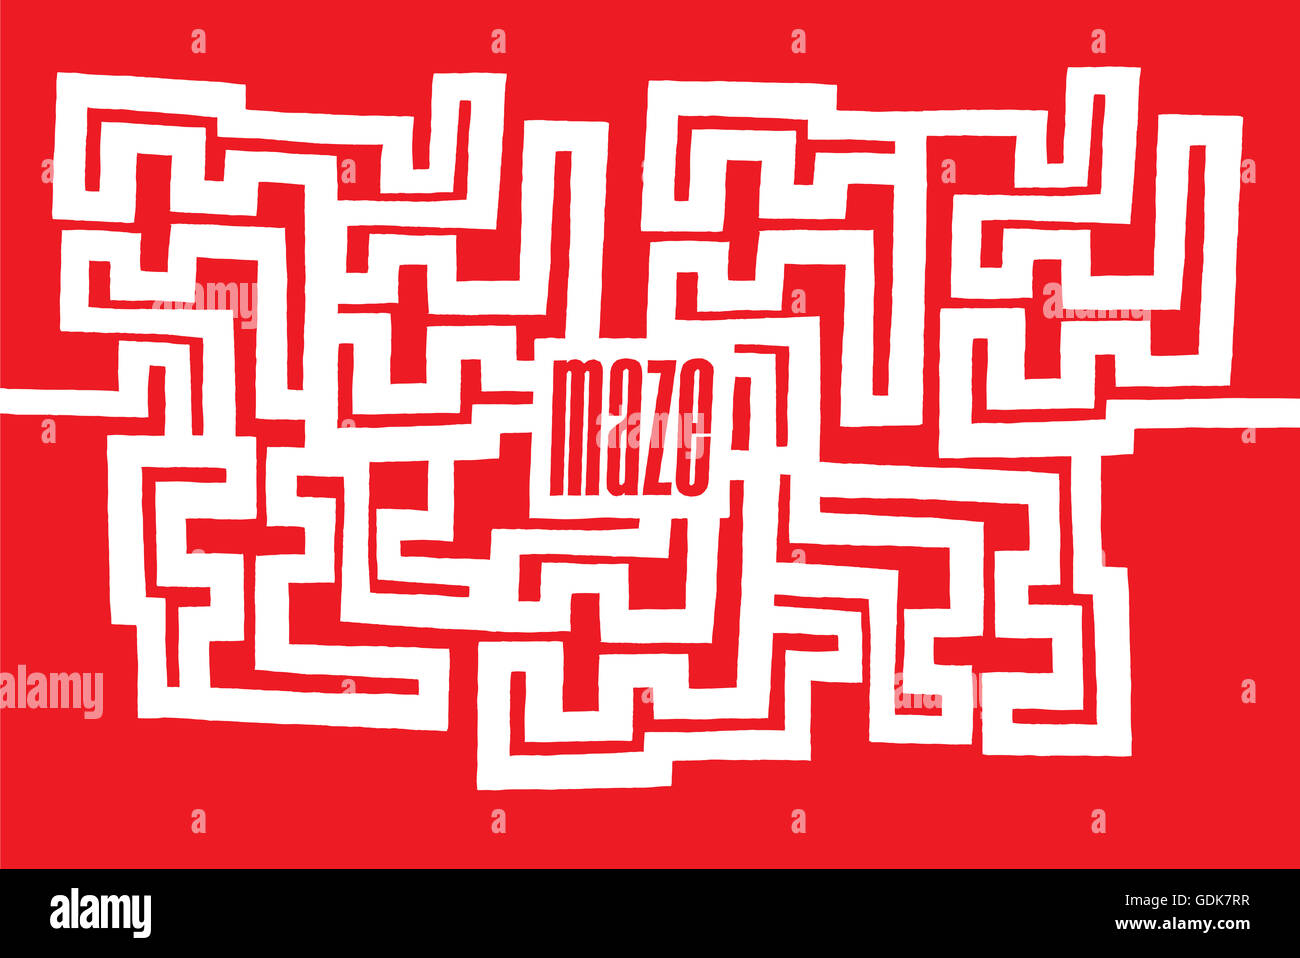 Cartoon illustration of complex maze or labyrinth with word on its center Stock Photo